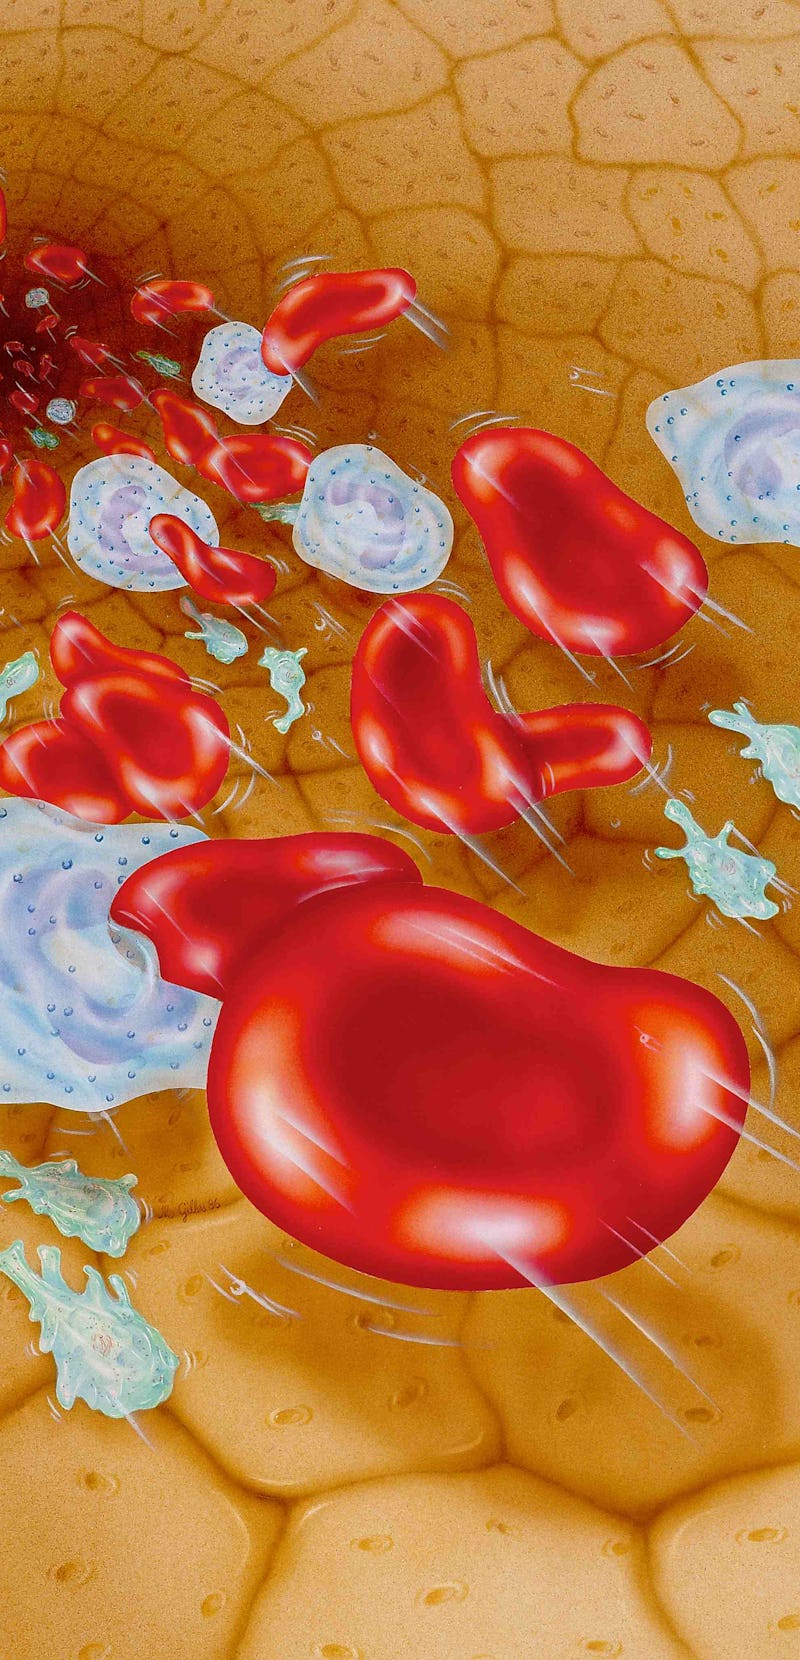 Here, red blood cells, white blood cells and platelets (green). (Photo by: GILLES/BSIP/Universal Ima...